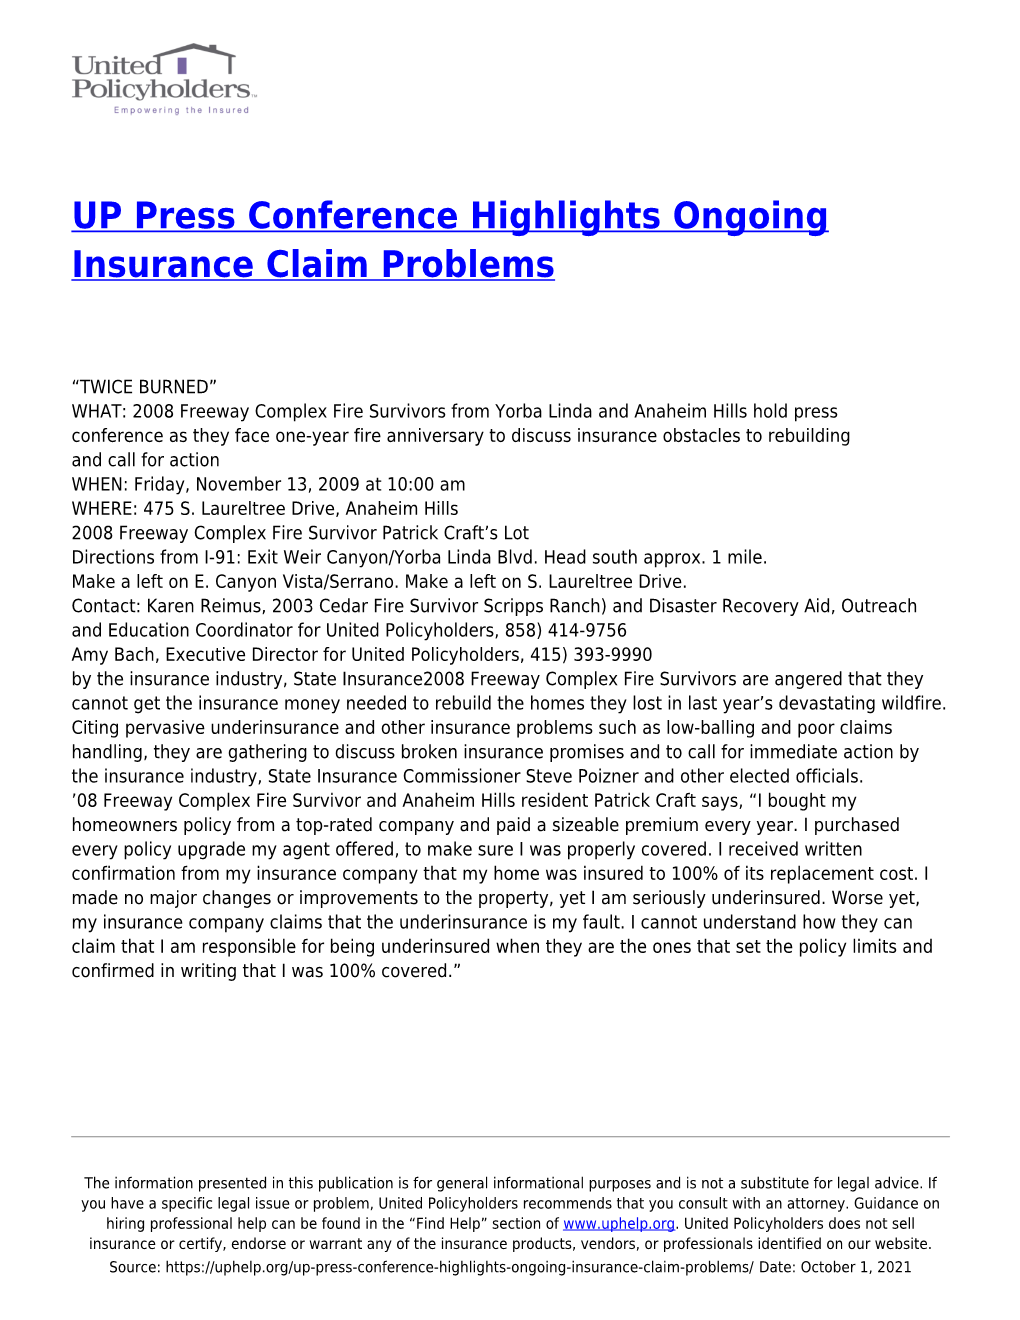 UP Press Conference Highlights Ongoing Insurance Claim Problems